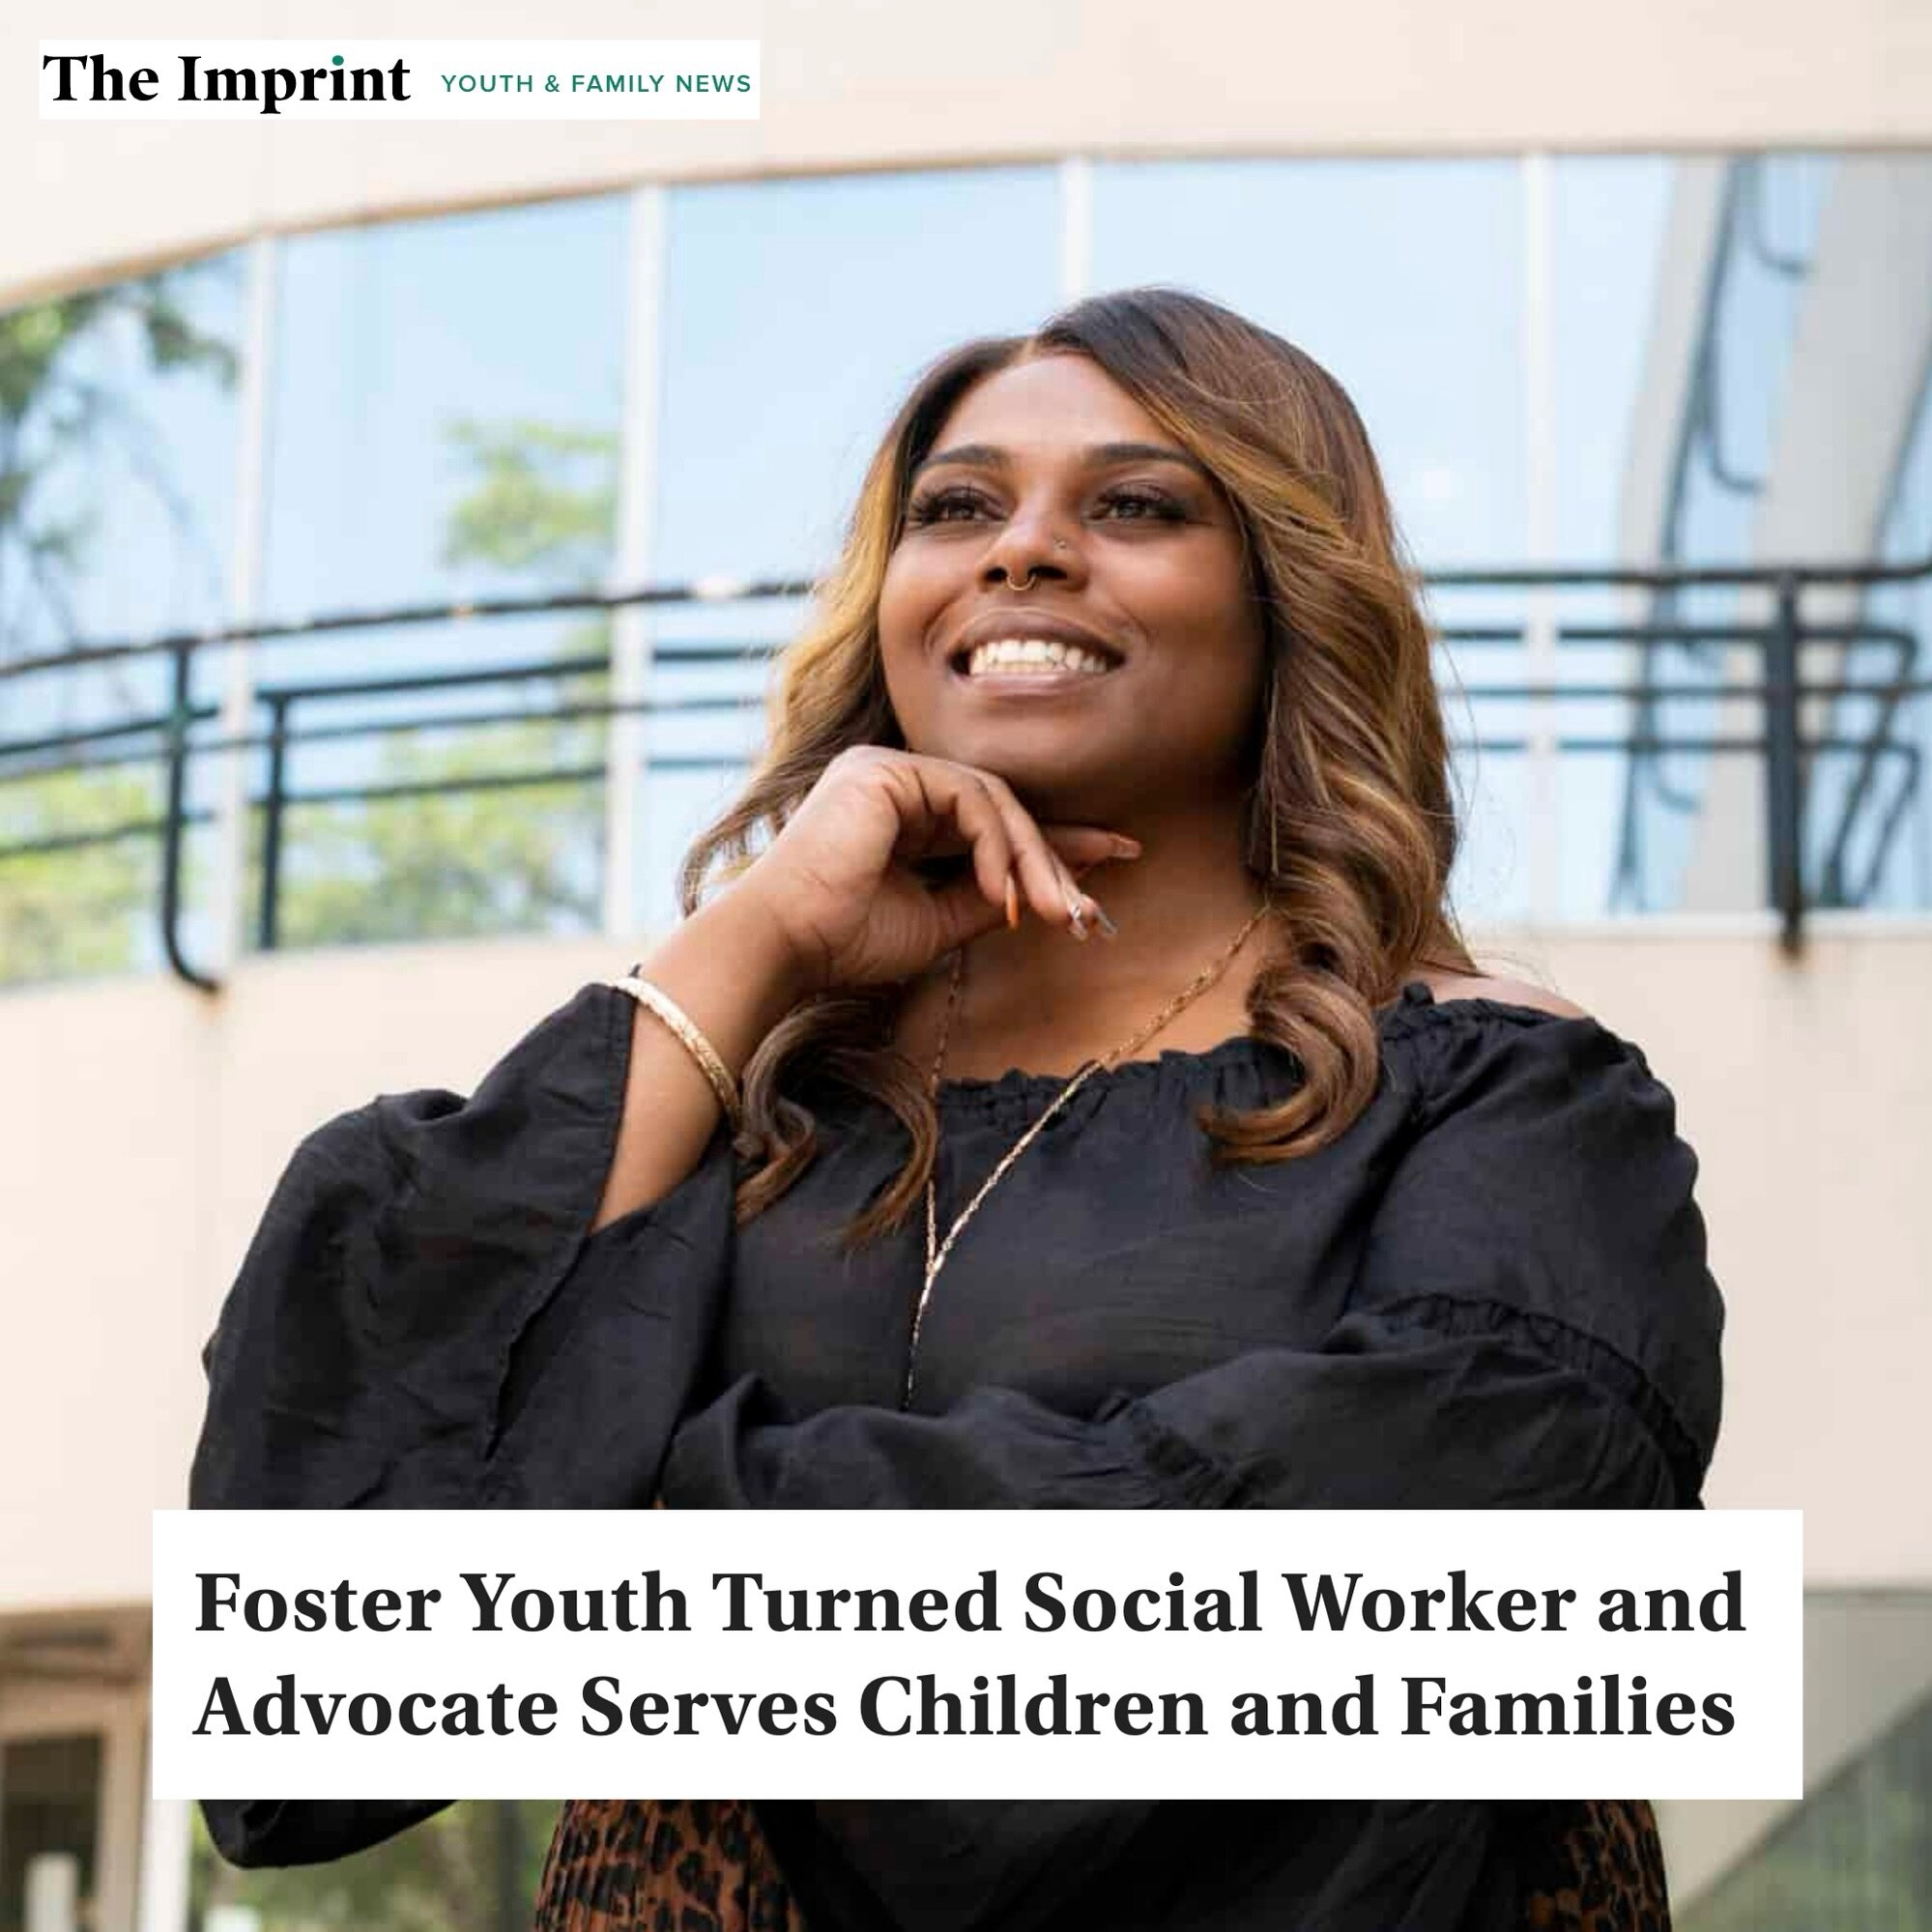 Before becoming a social worker, Cortney Jones experienced the foster care system at its worst. 
In 1993,&nbsp;she was led away from her elementary school by police officers after she reported being abused at home. Placed in foster care, she was sepa